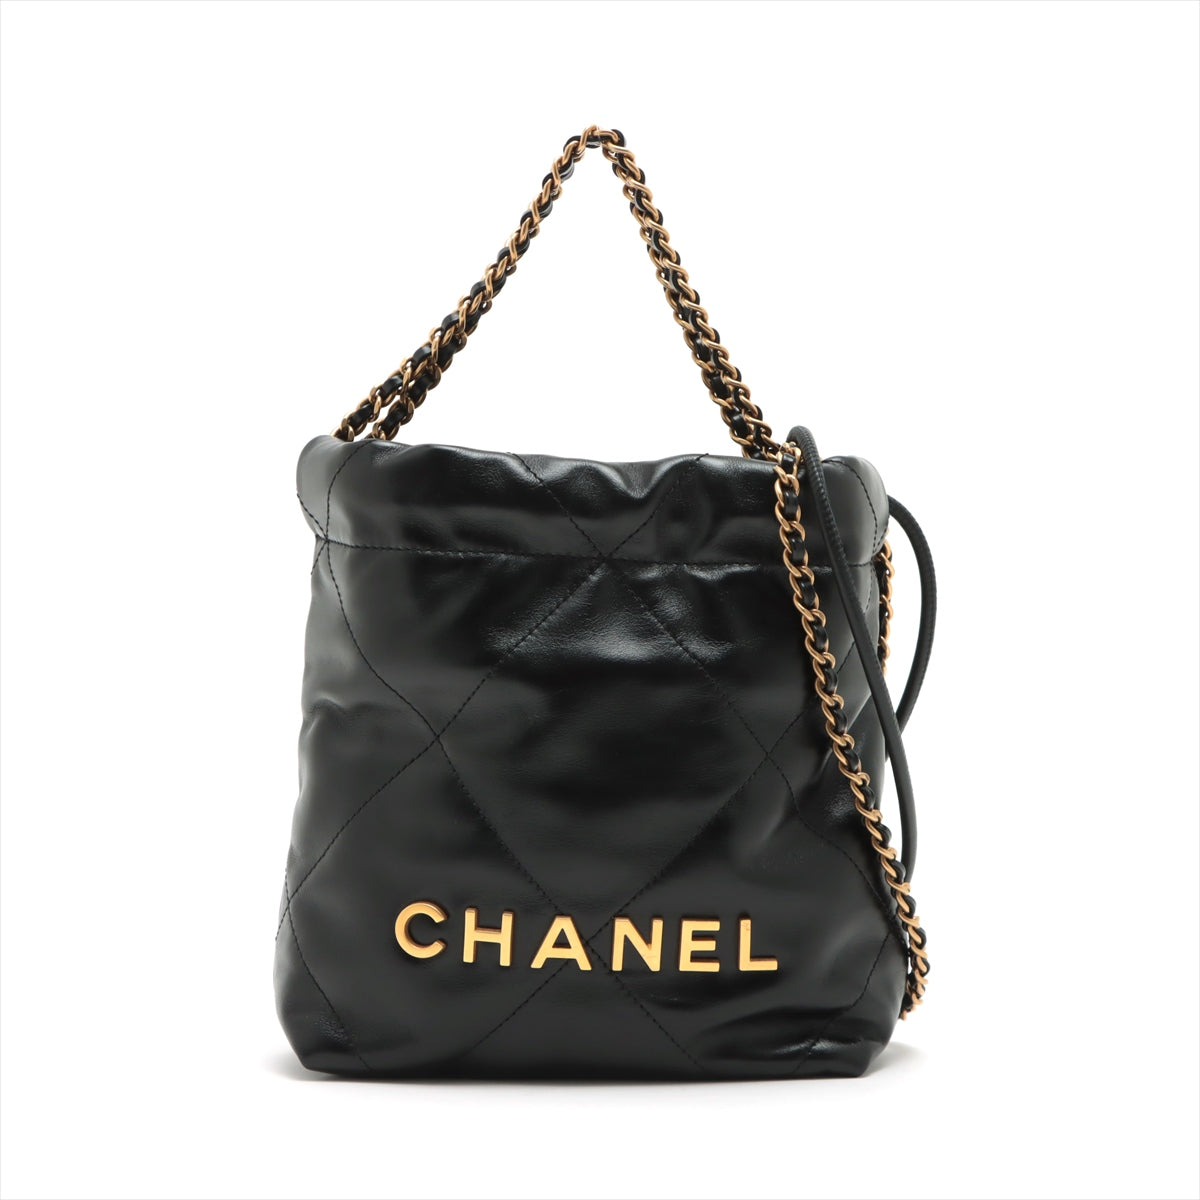 Chanel Chanel 22 Ram leather Chain shoulder bag Purse Black Gold Metal fittings There is an IC chip